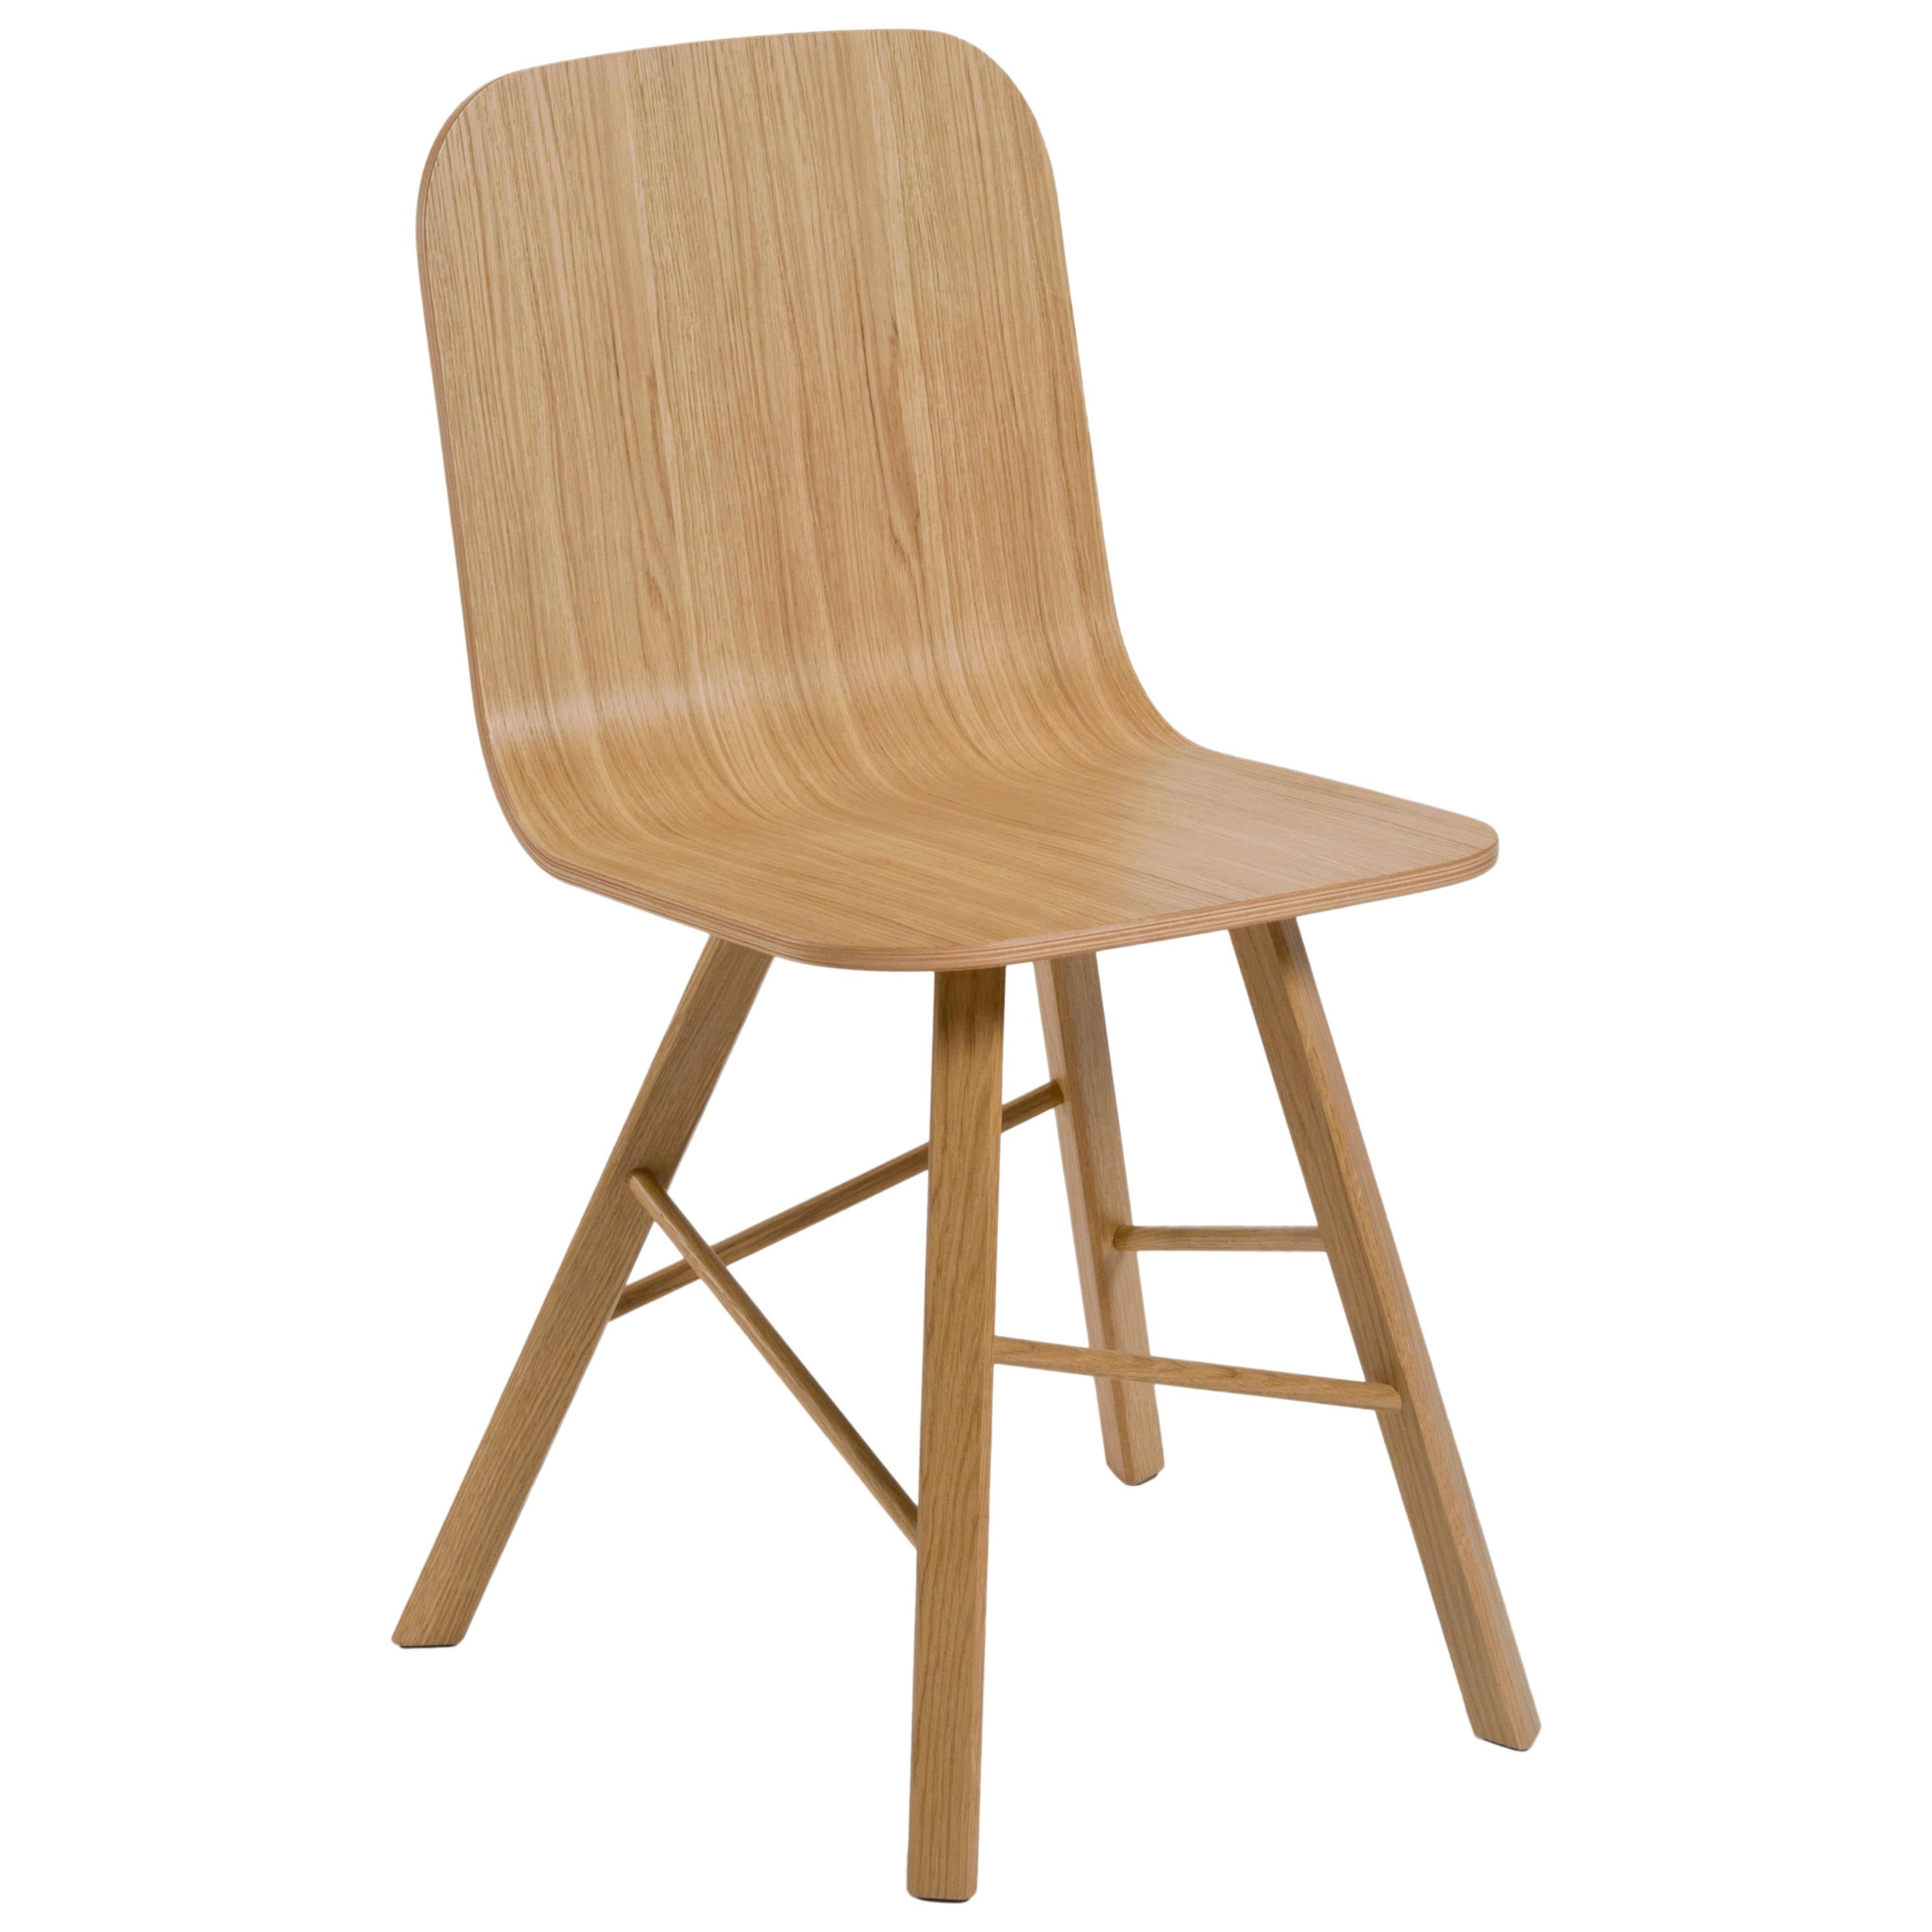 Paint Tria Simple Chair by Colé Natural Leather and oak legs, Minimalist Made in Italy For Sale